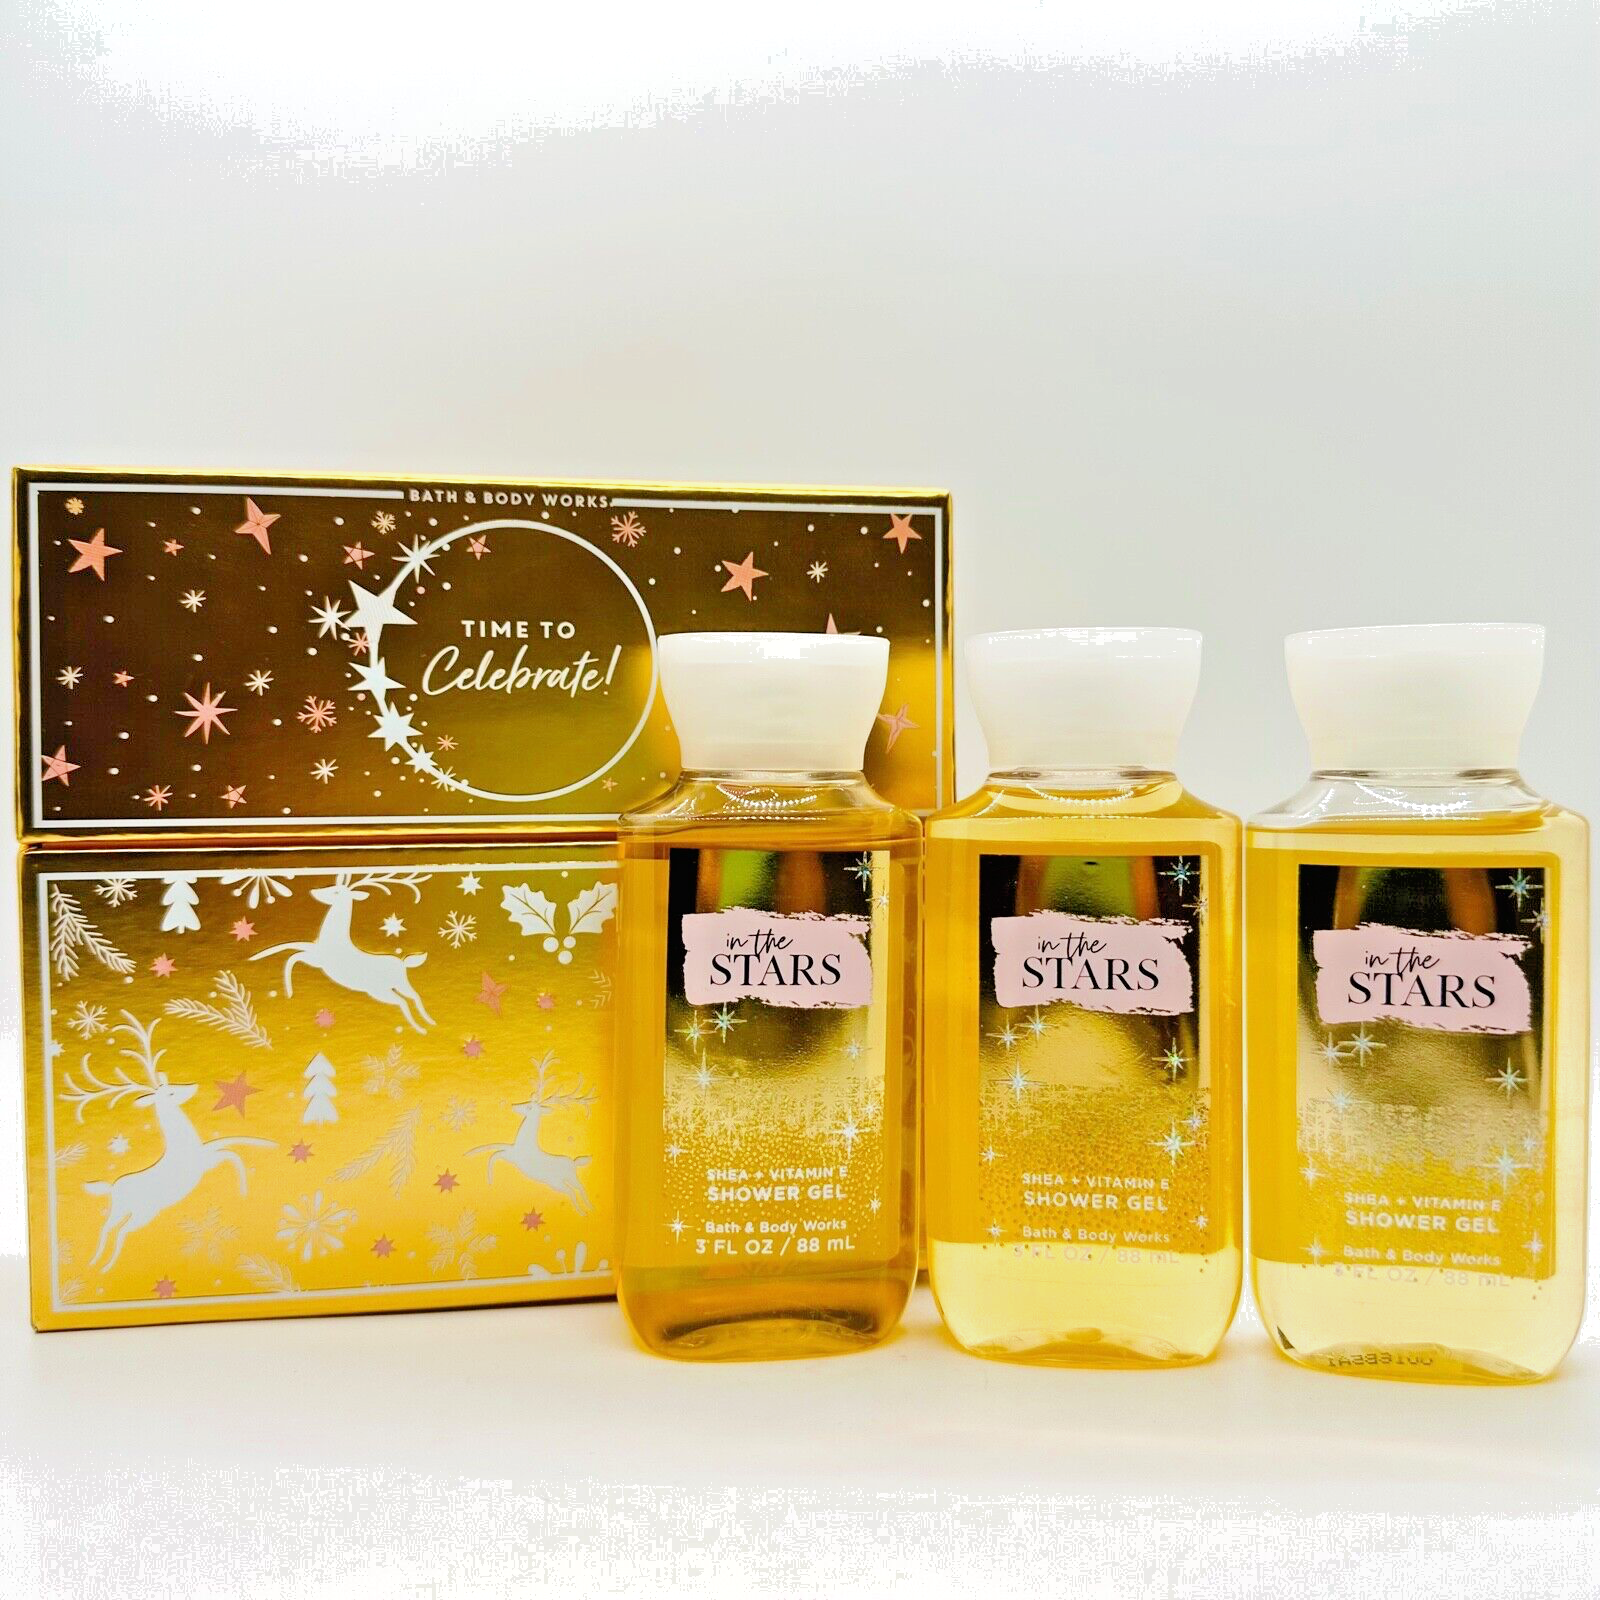 Bath & Body Works IN THE STARS 3 Mini Shower Gels Box Time To Celebrate  Gift Set